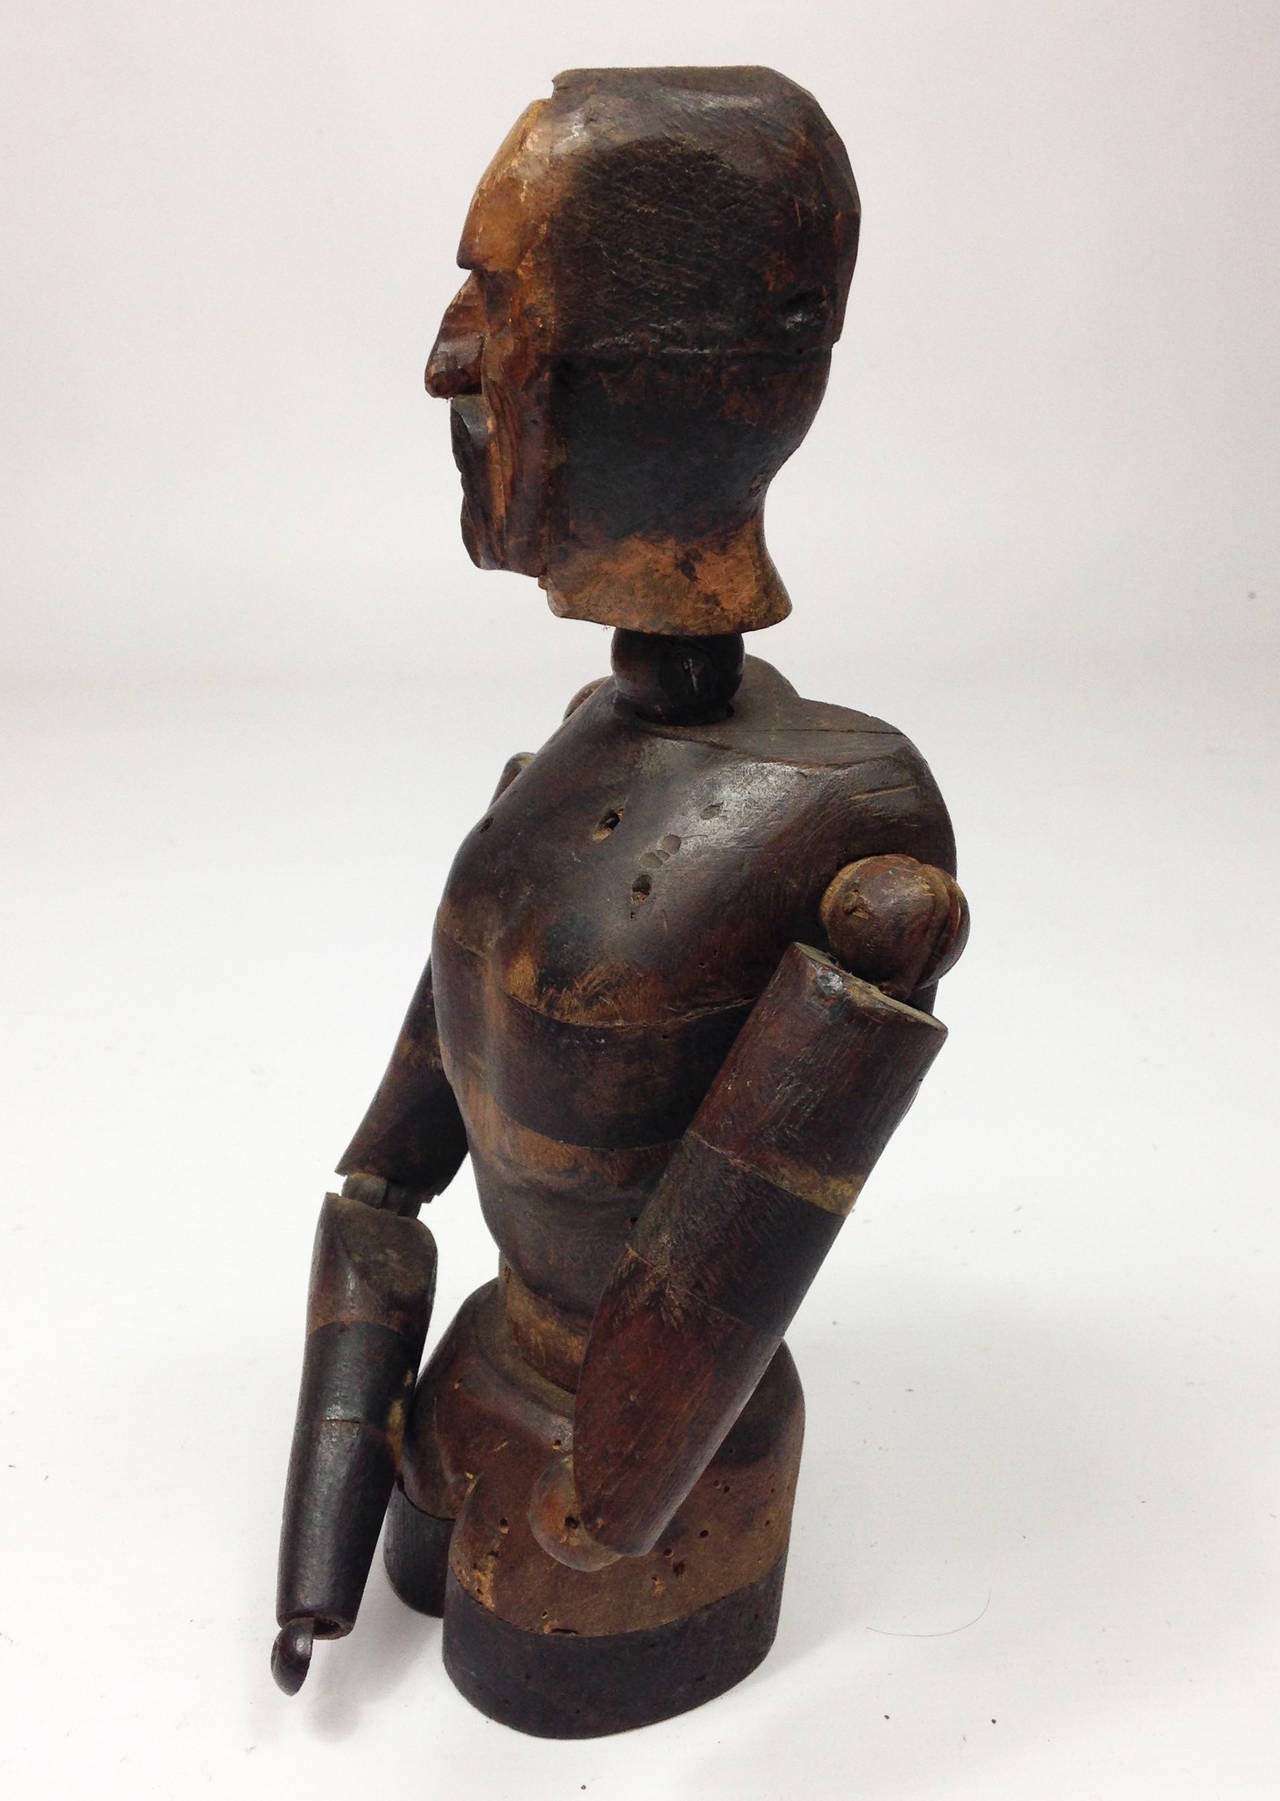 An unusual mid 19th century wooden lay figure.

Constructed of several sections, articulated joints and various types of wood.

Carved male head in a medieval style.